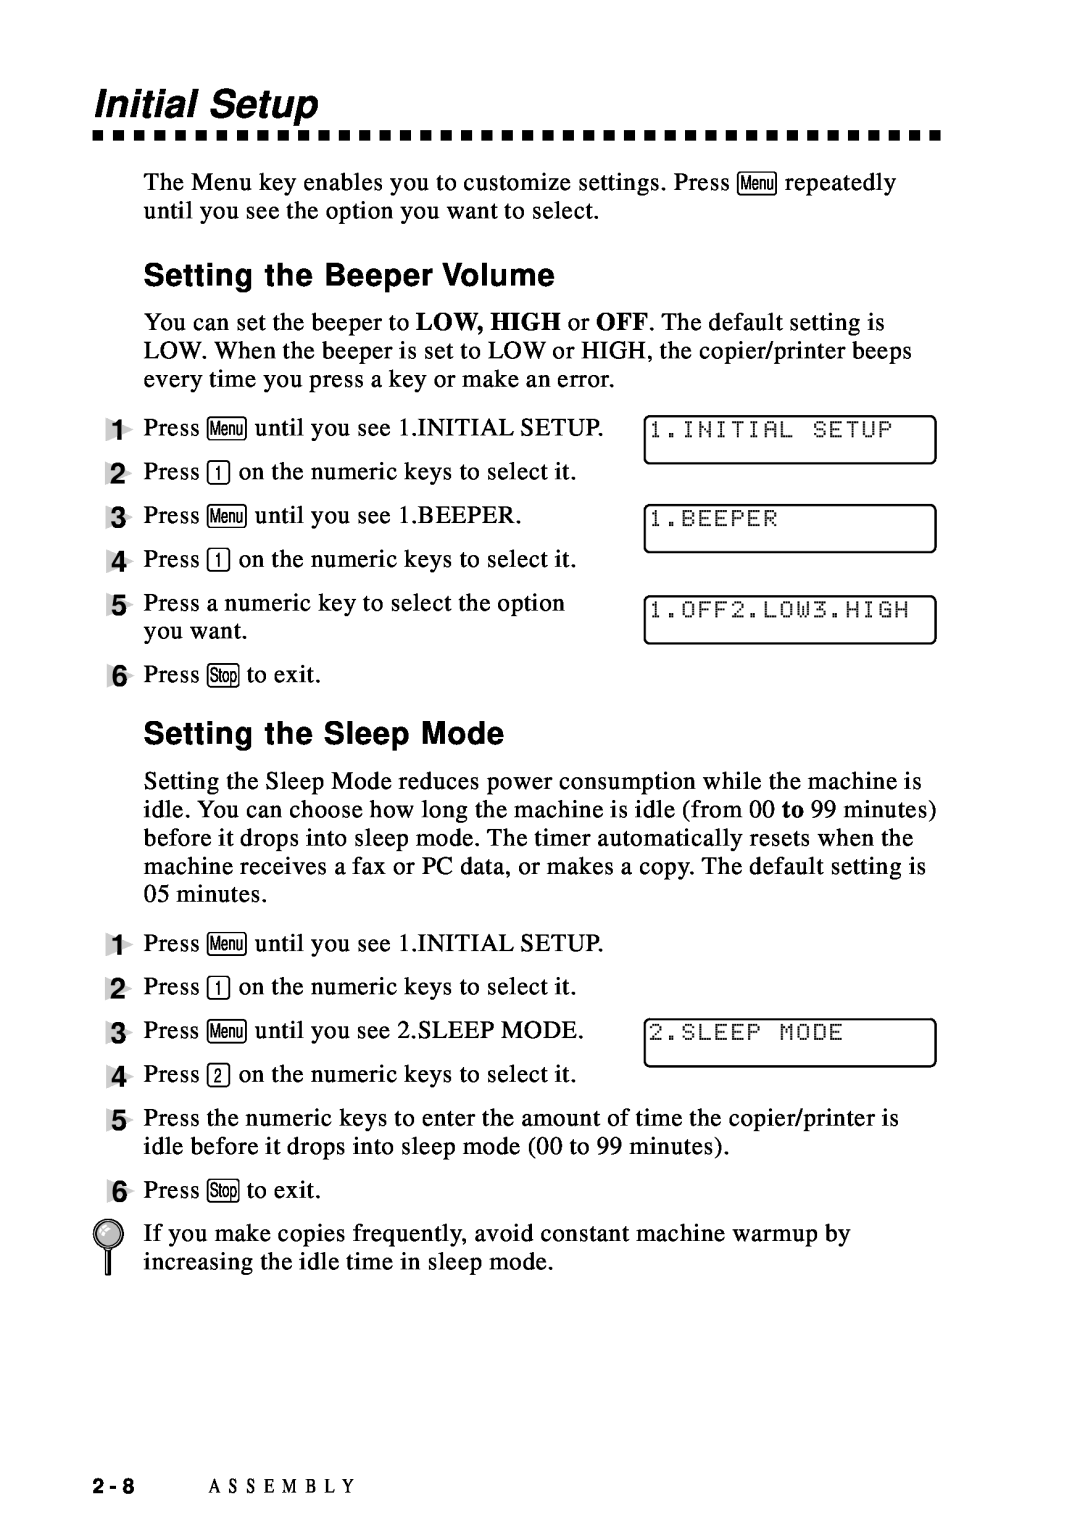 Brother DCP1200 manual Initial Setup, Setting the Beeper Volume, Setting the Sleep Mode 